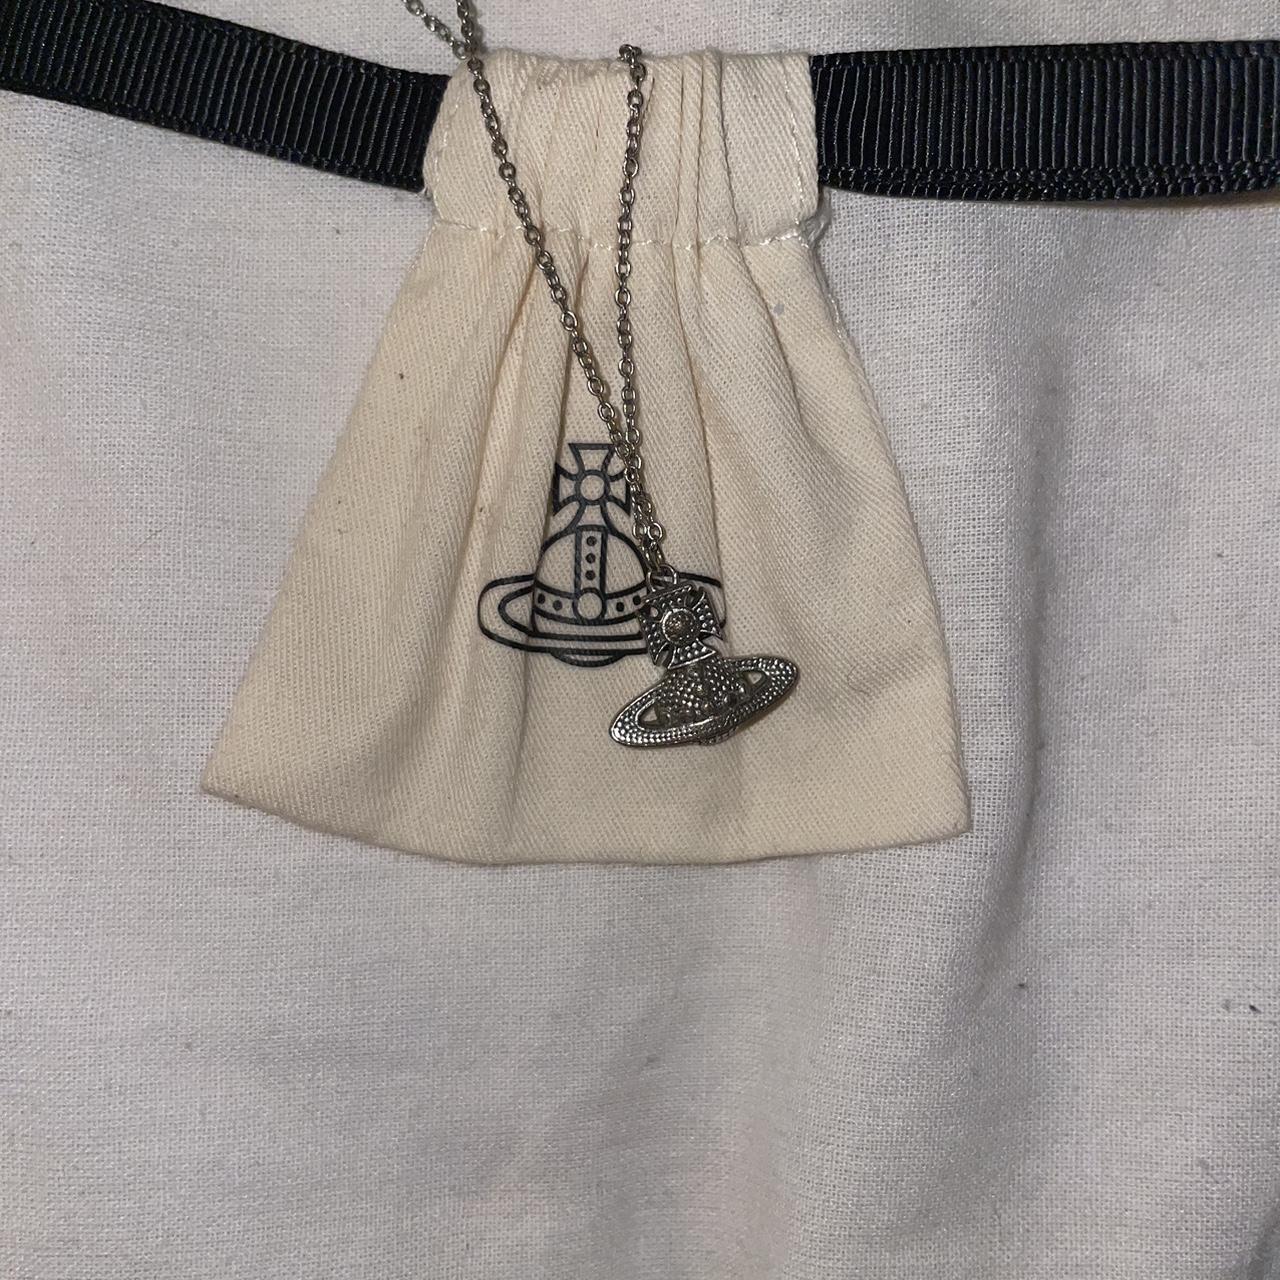 REAL vivienne westwood necklace silver any other... - Depop